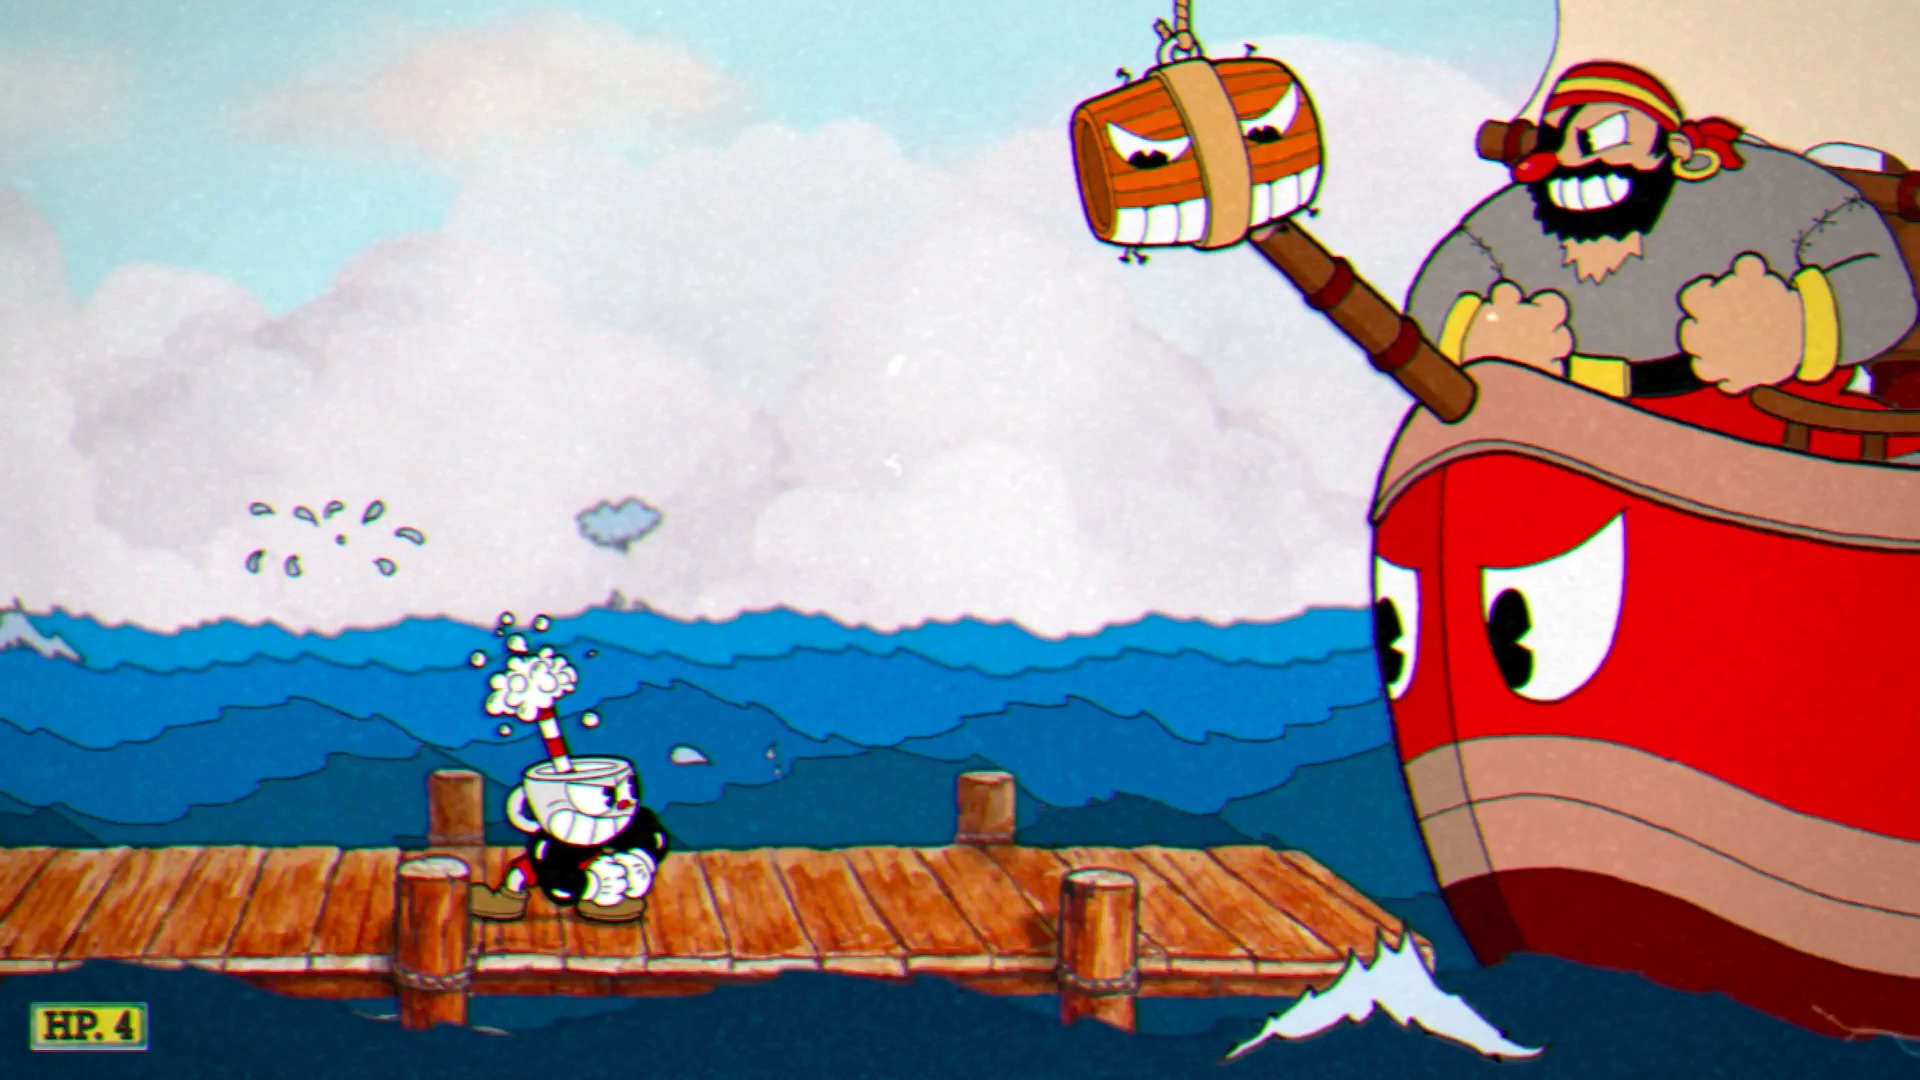 Drew this in honor of The Cuphead Show! : r/Cuphead